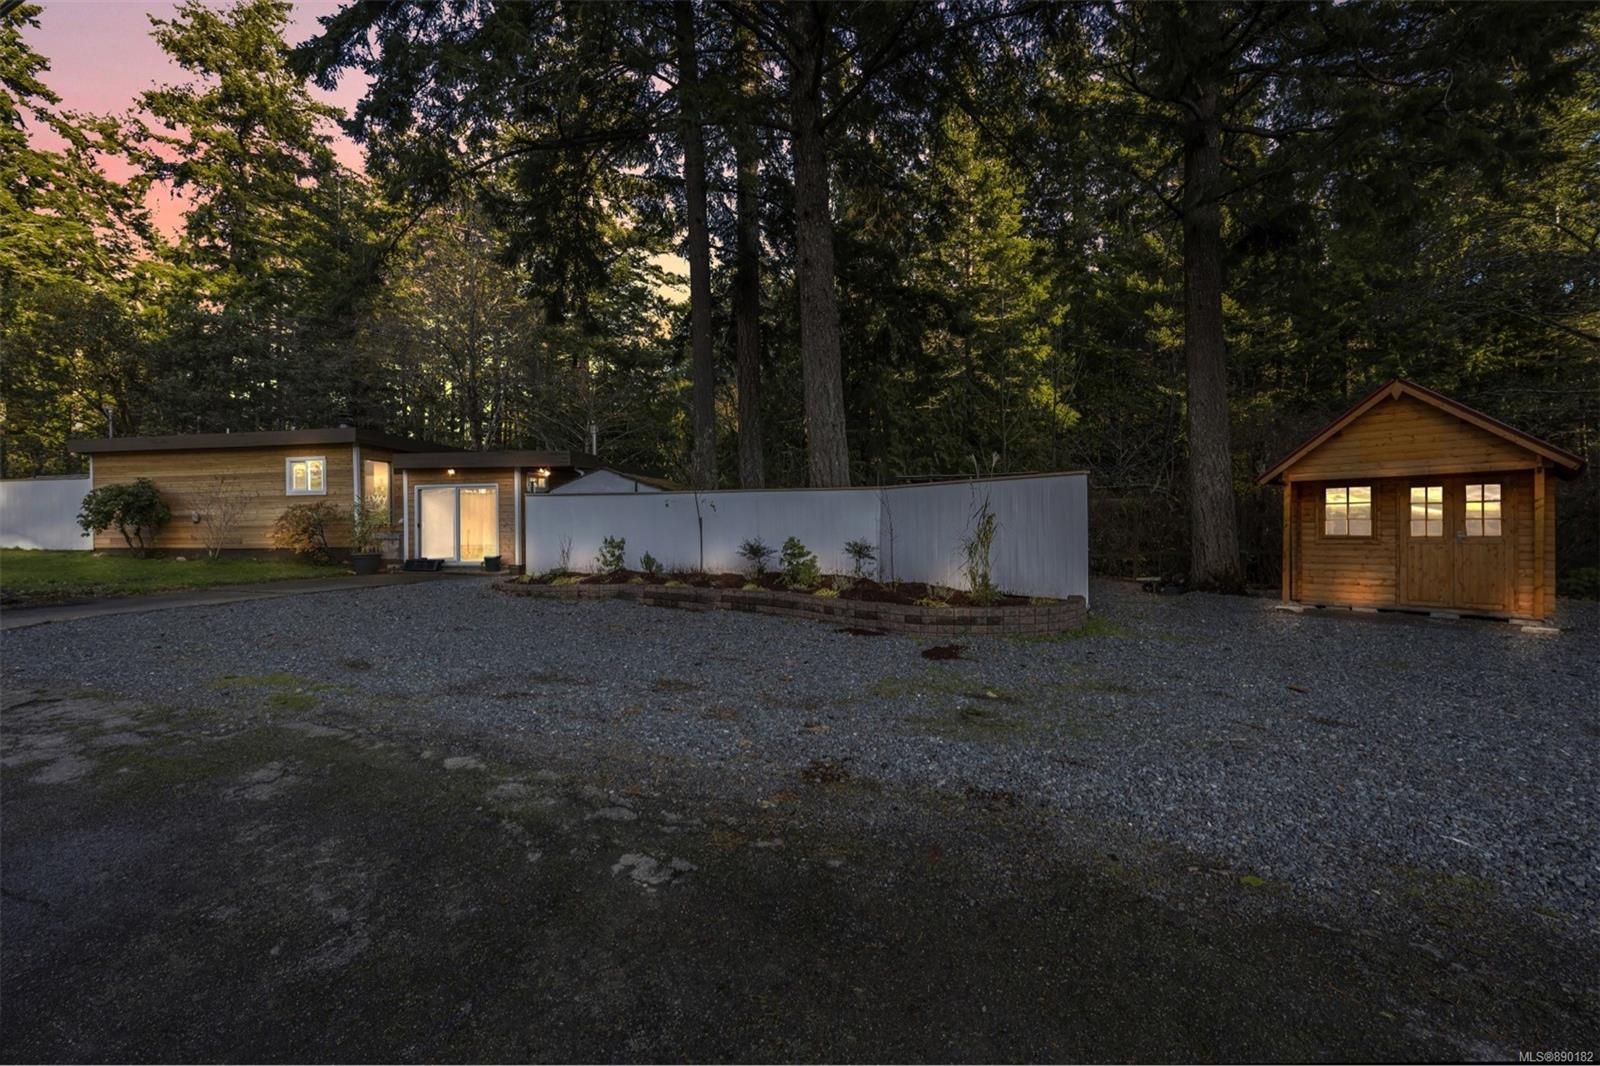 I have sold a property at 3901 Happy Valley Rd in Metchosin
